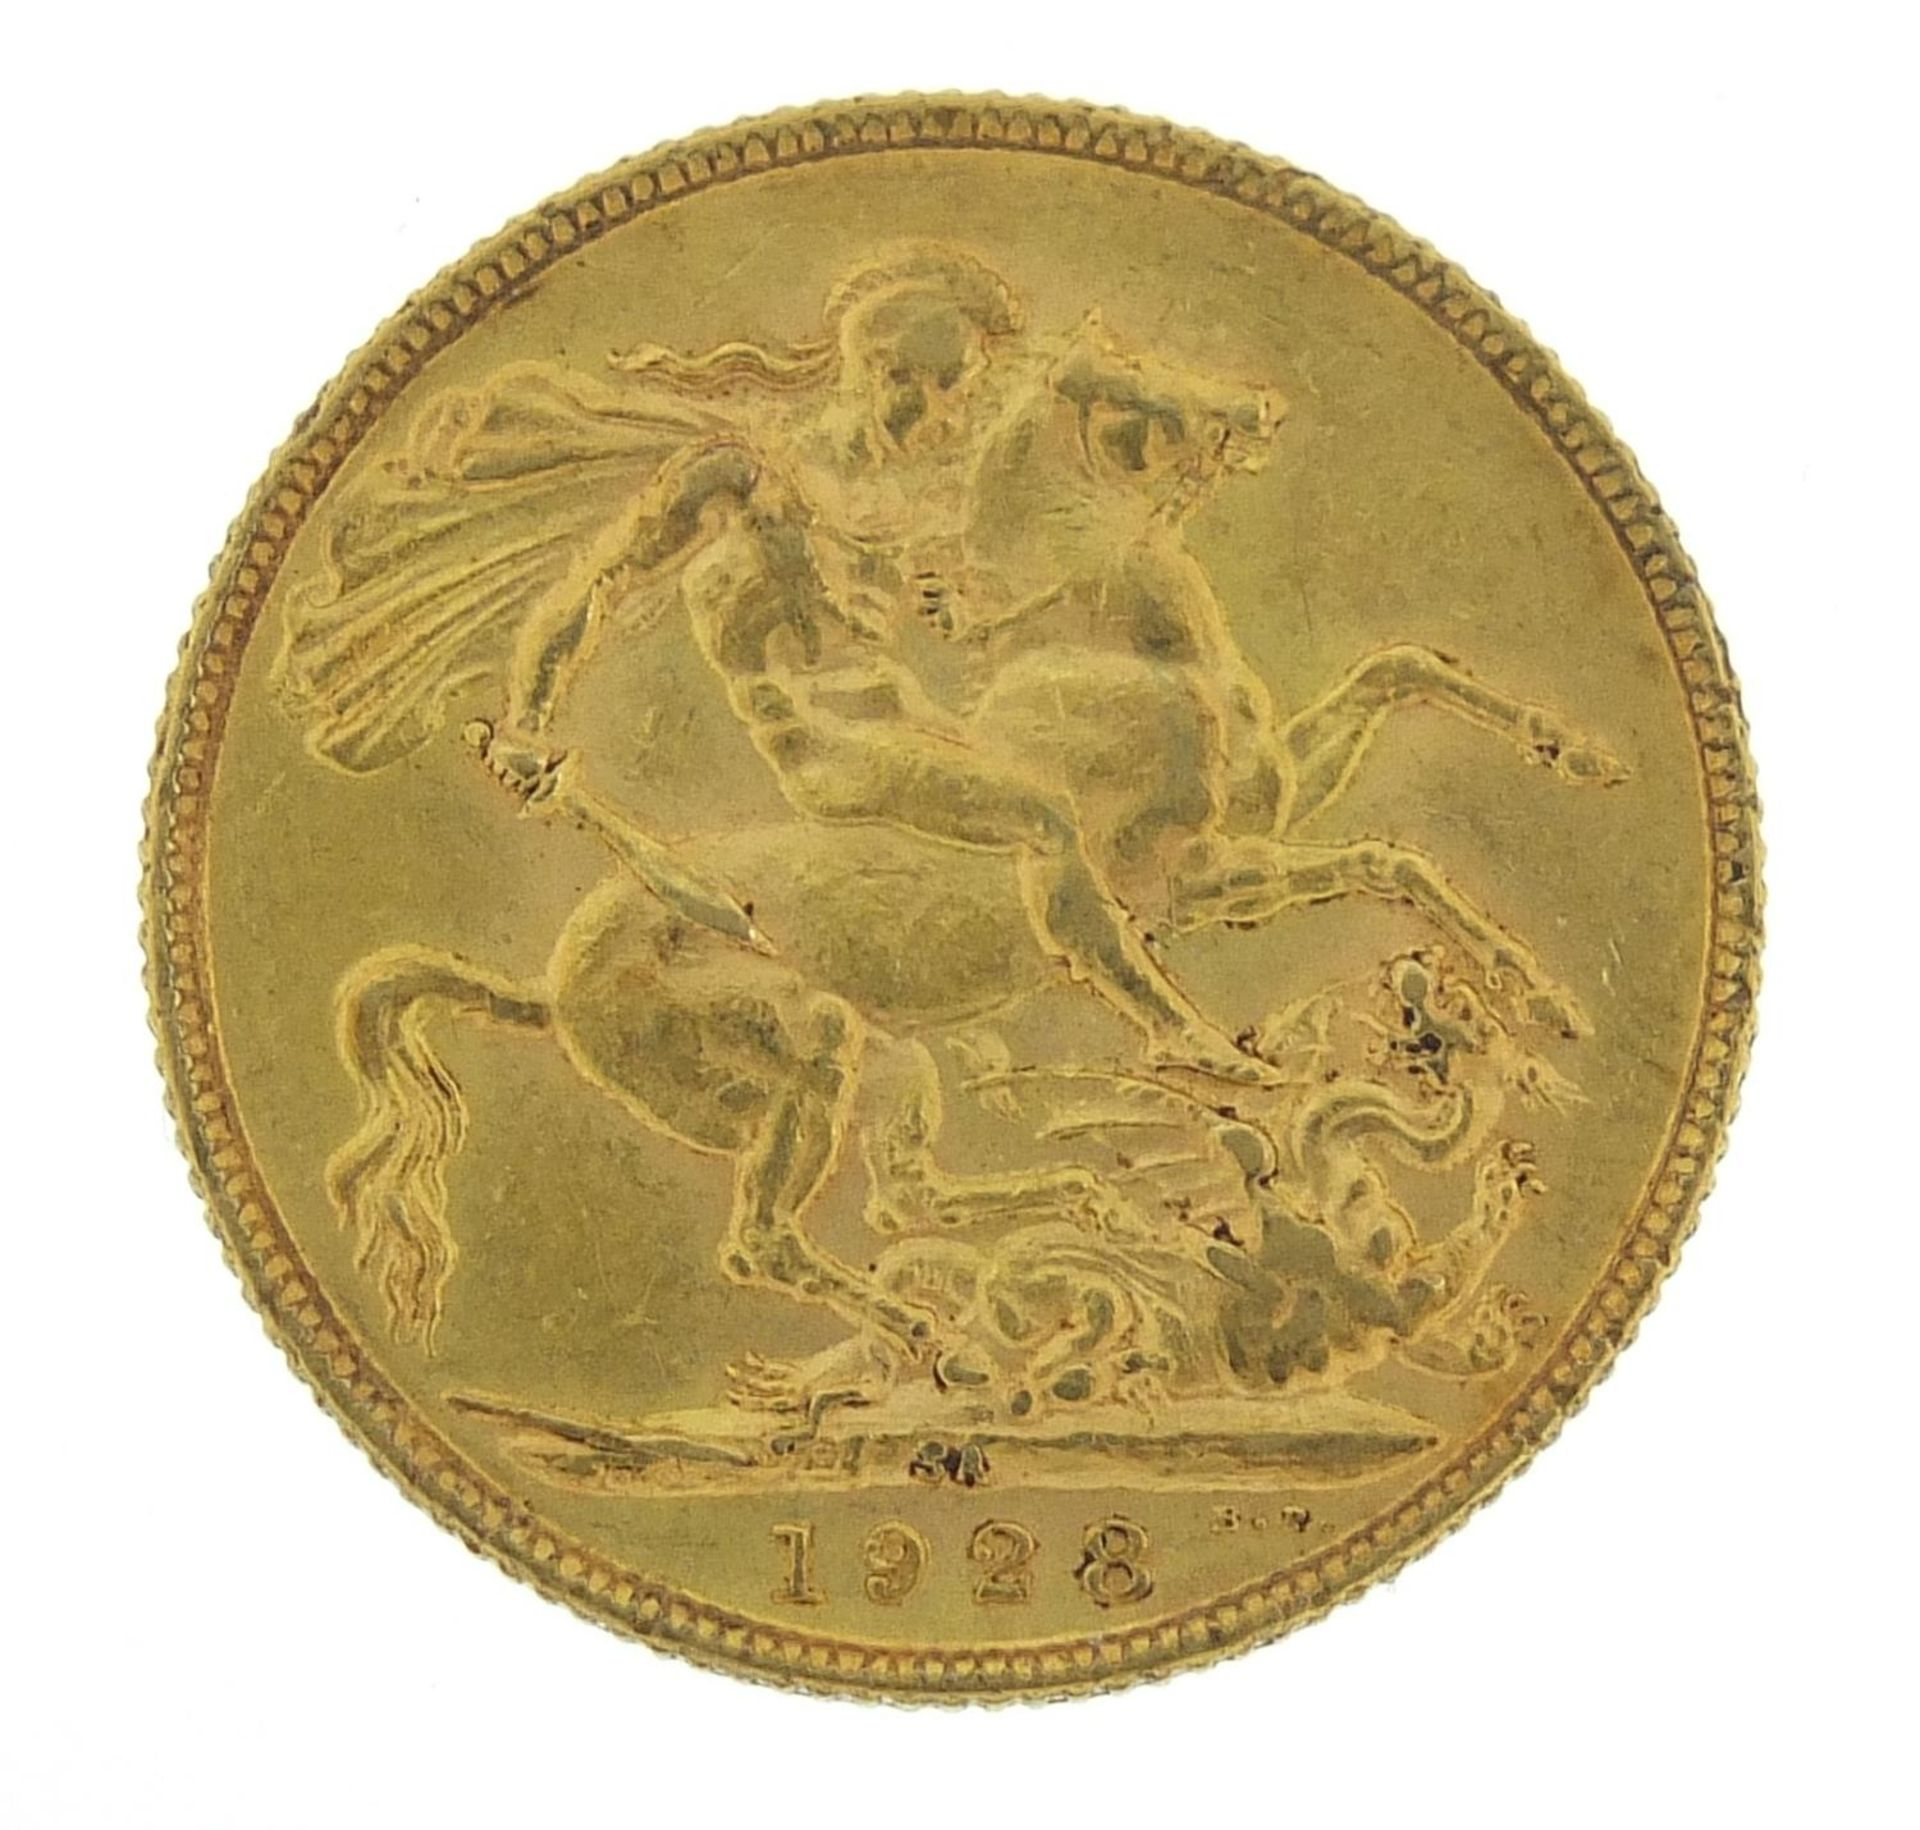 George V 1928 gold sovereign, South African mint - this lot is sold without buyer's premium